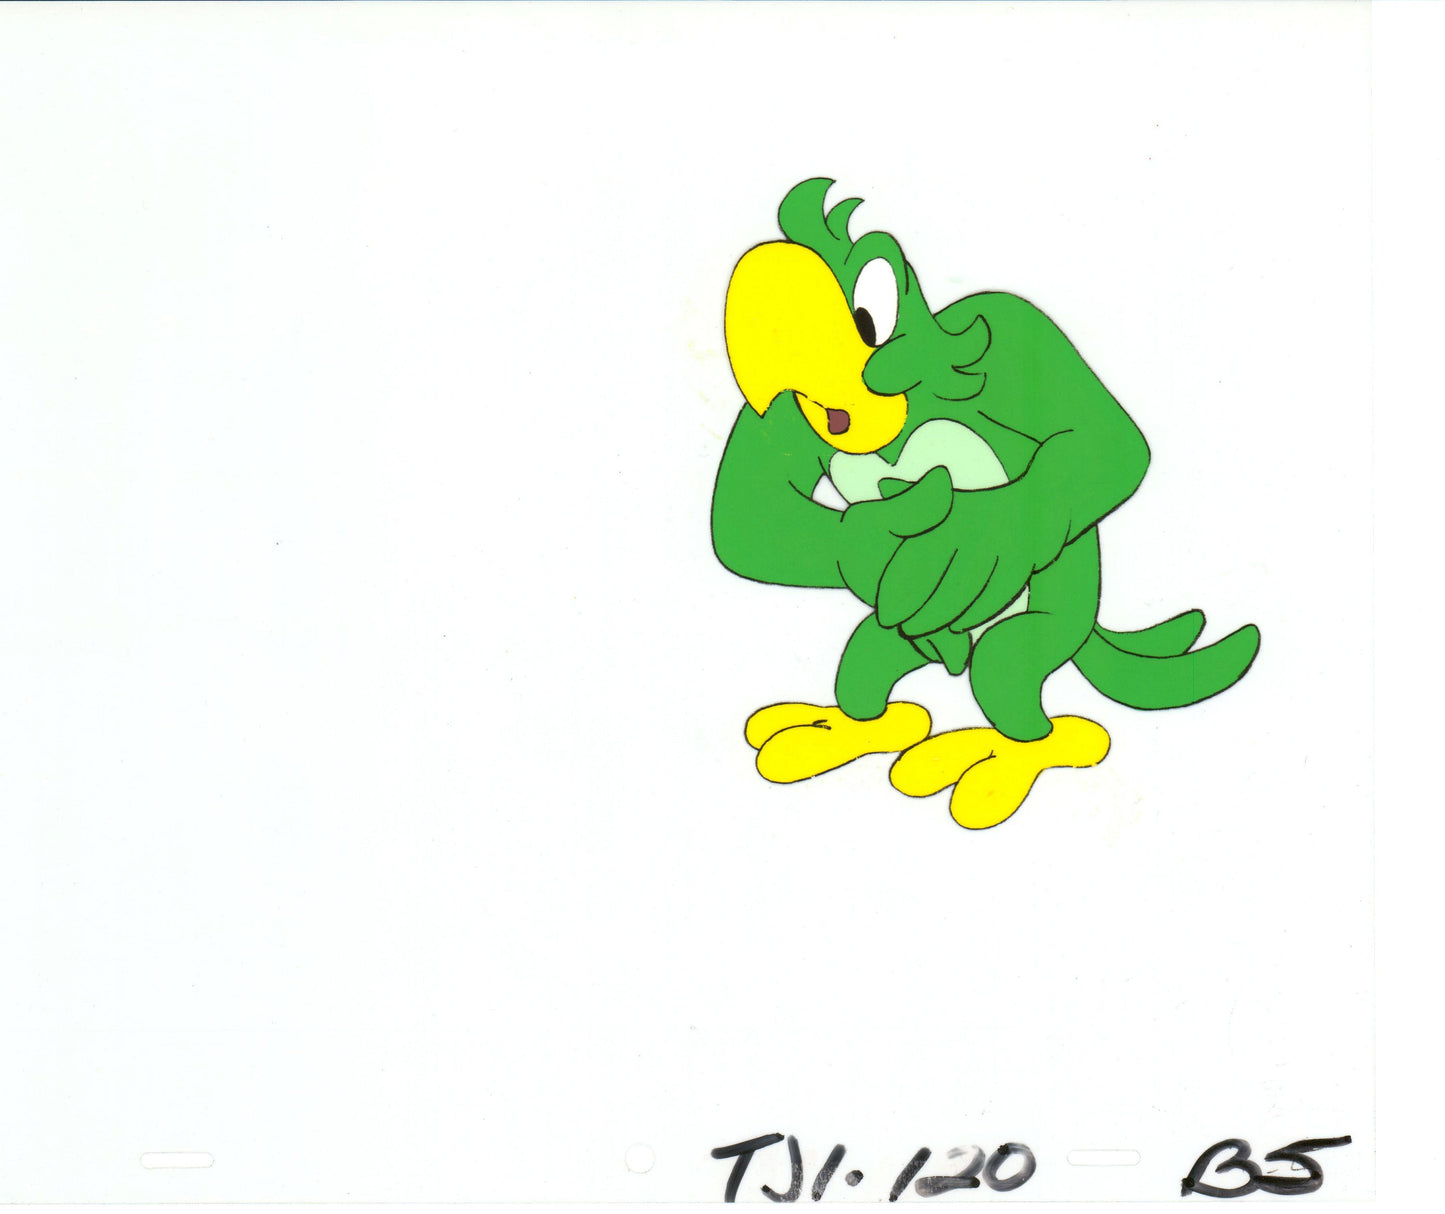 Tom and Jerry Original Production Animation Cel from Filmation 1980-82 b4252